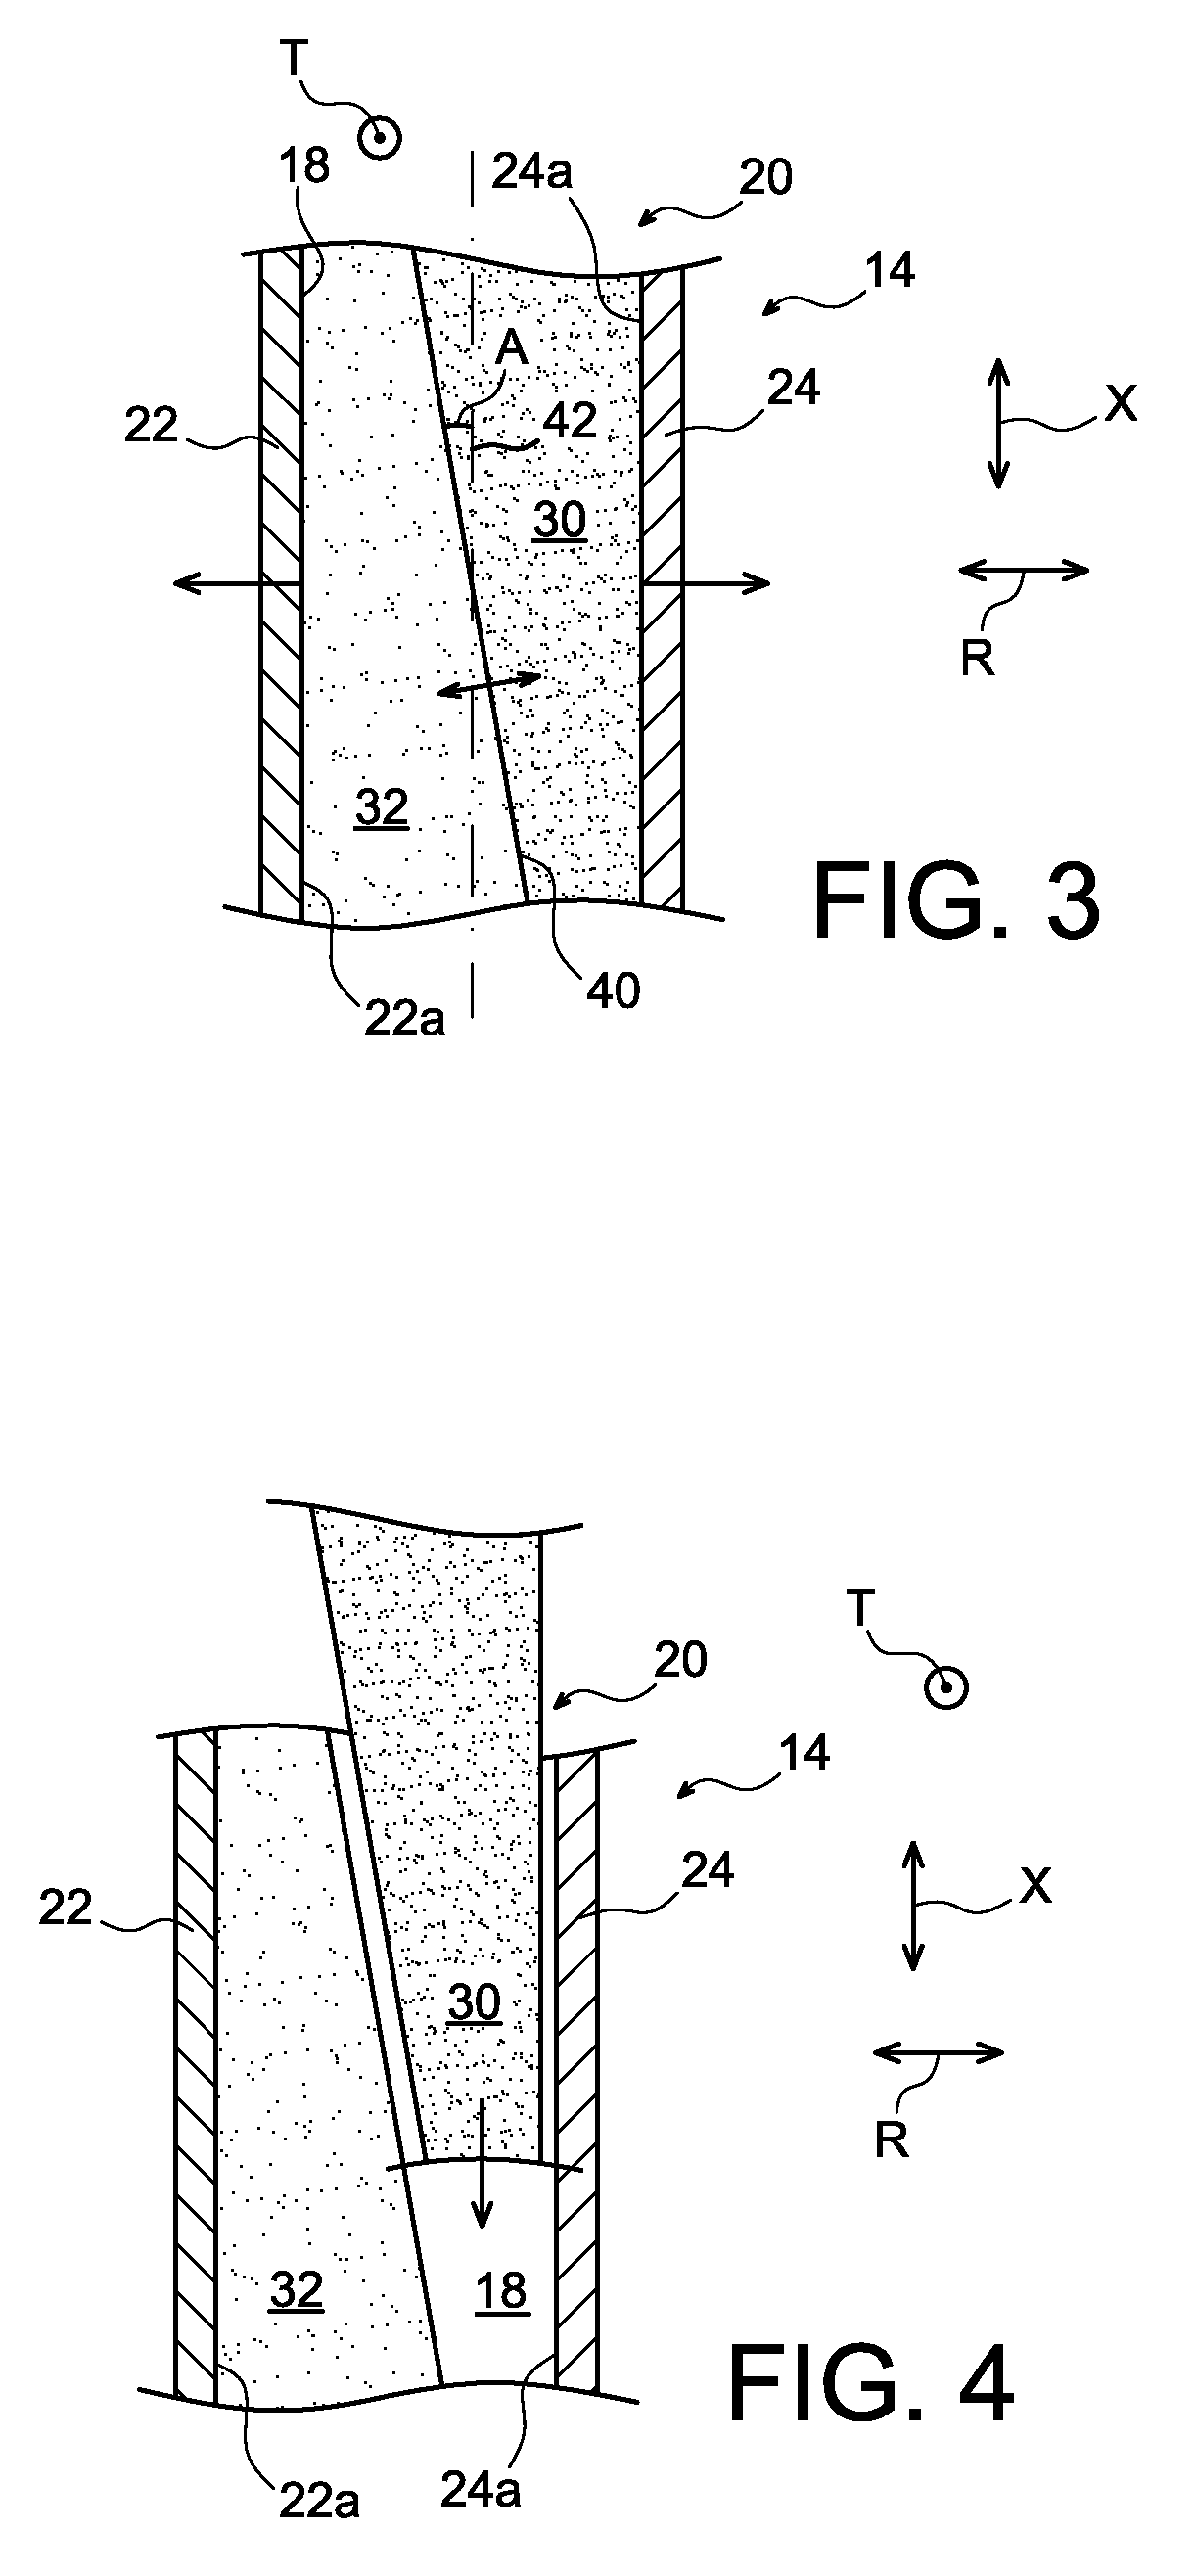 Canister for transporting and/or storing radioactive materials comprising radially stacked radiological protection components